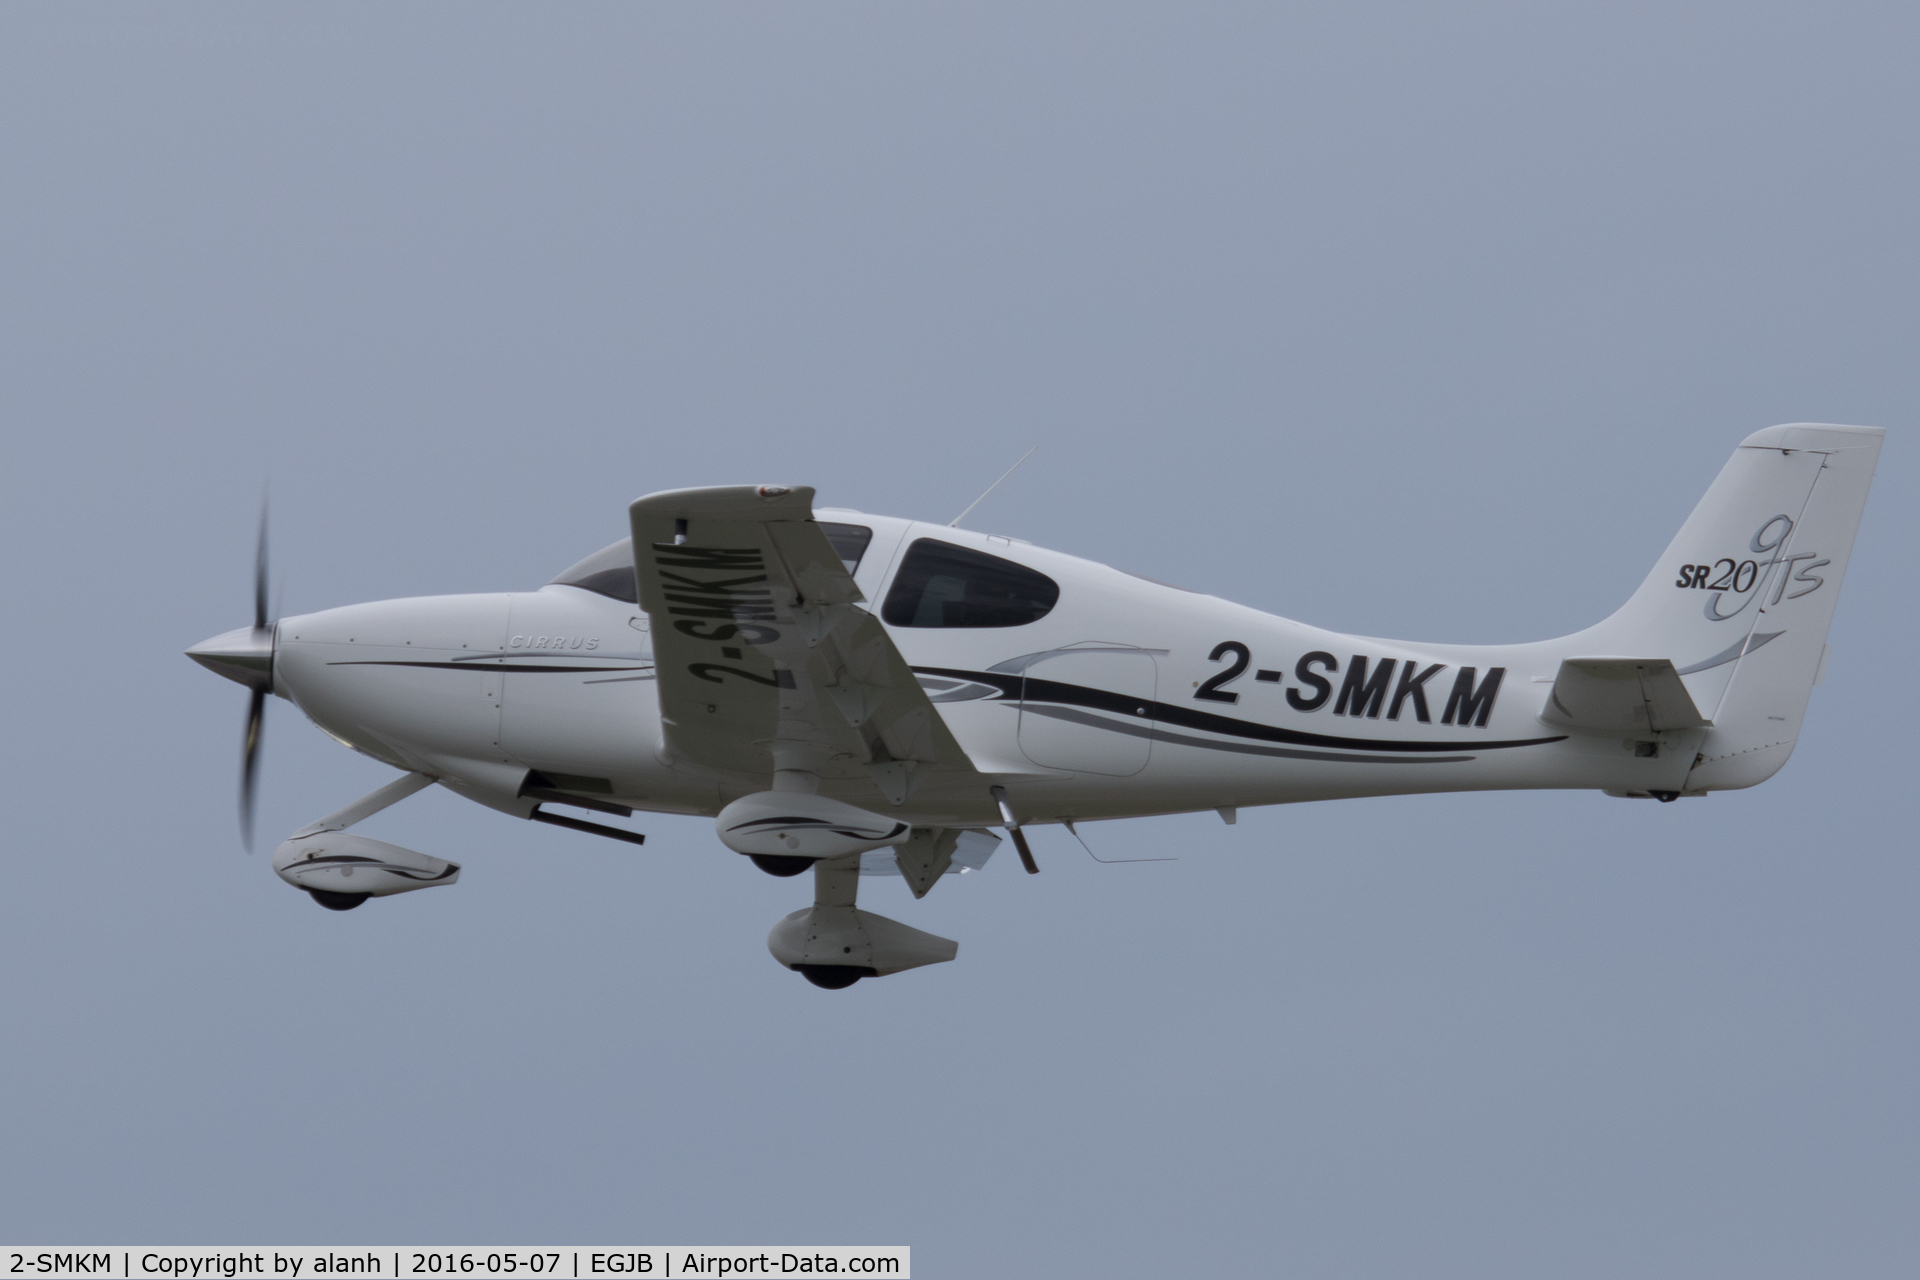 2-SMKM, 2006 Cirrus SR20 GTS C/N 1662, Departing Guernsey, now on the Guernsey register as 2-SMKM, previously on the Manx (Isle of Man) register